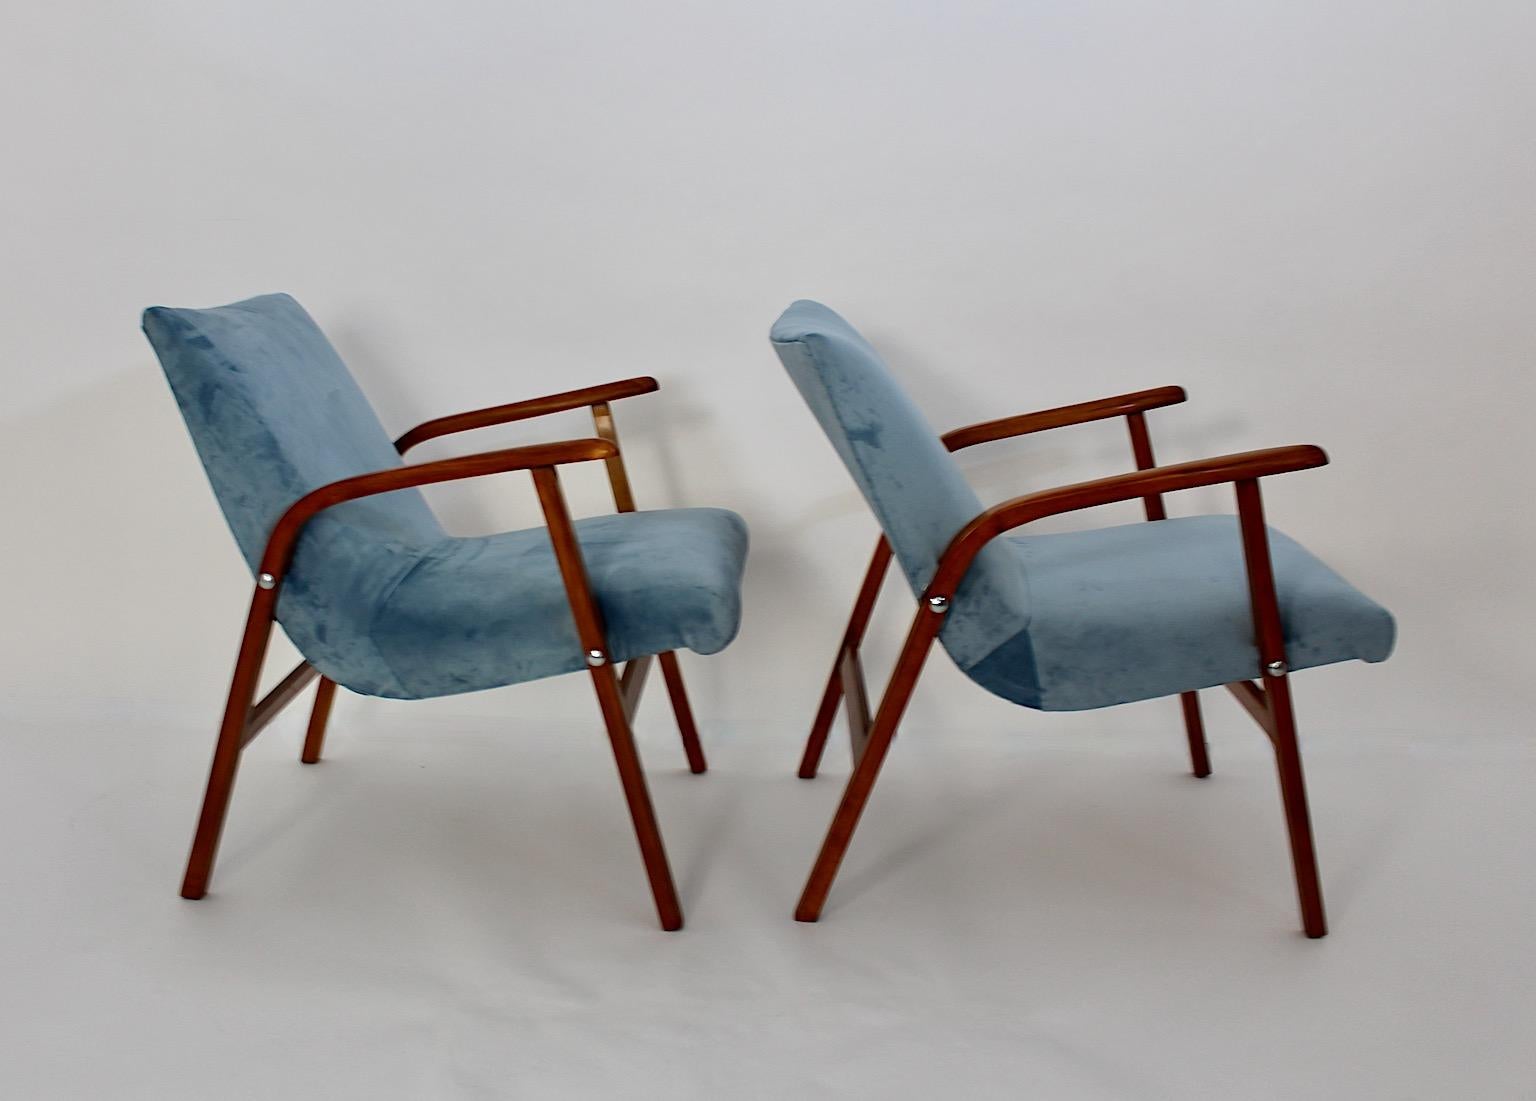 Mid Century Modern Modernist freestanding vintage pair armchairs from beech and pastel blue velvet by Roland Rainer for Cafe Ritter 1950s Vienna.
An amazing and iconic pair or duo armchairs from beechwood and newly covered seat and back with pastel